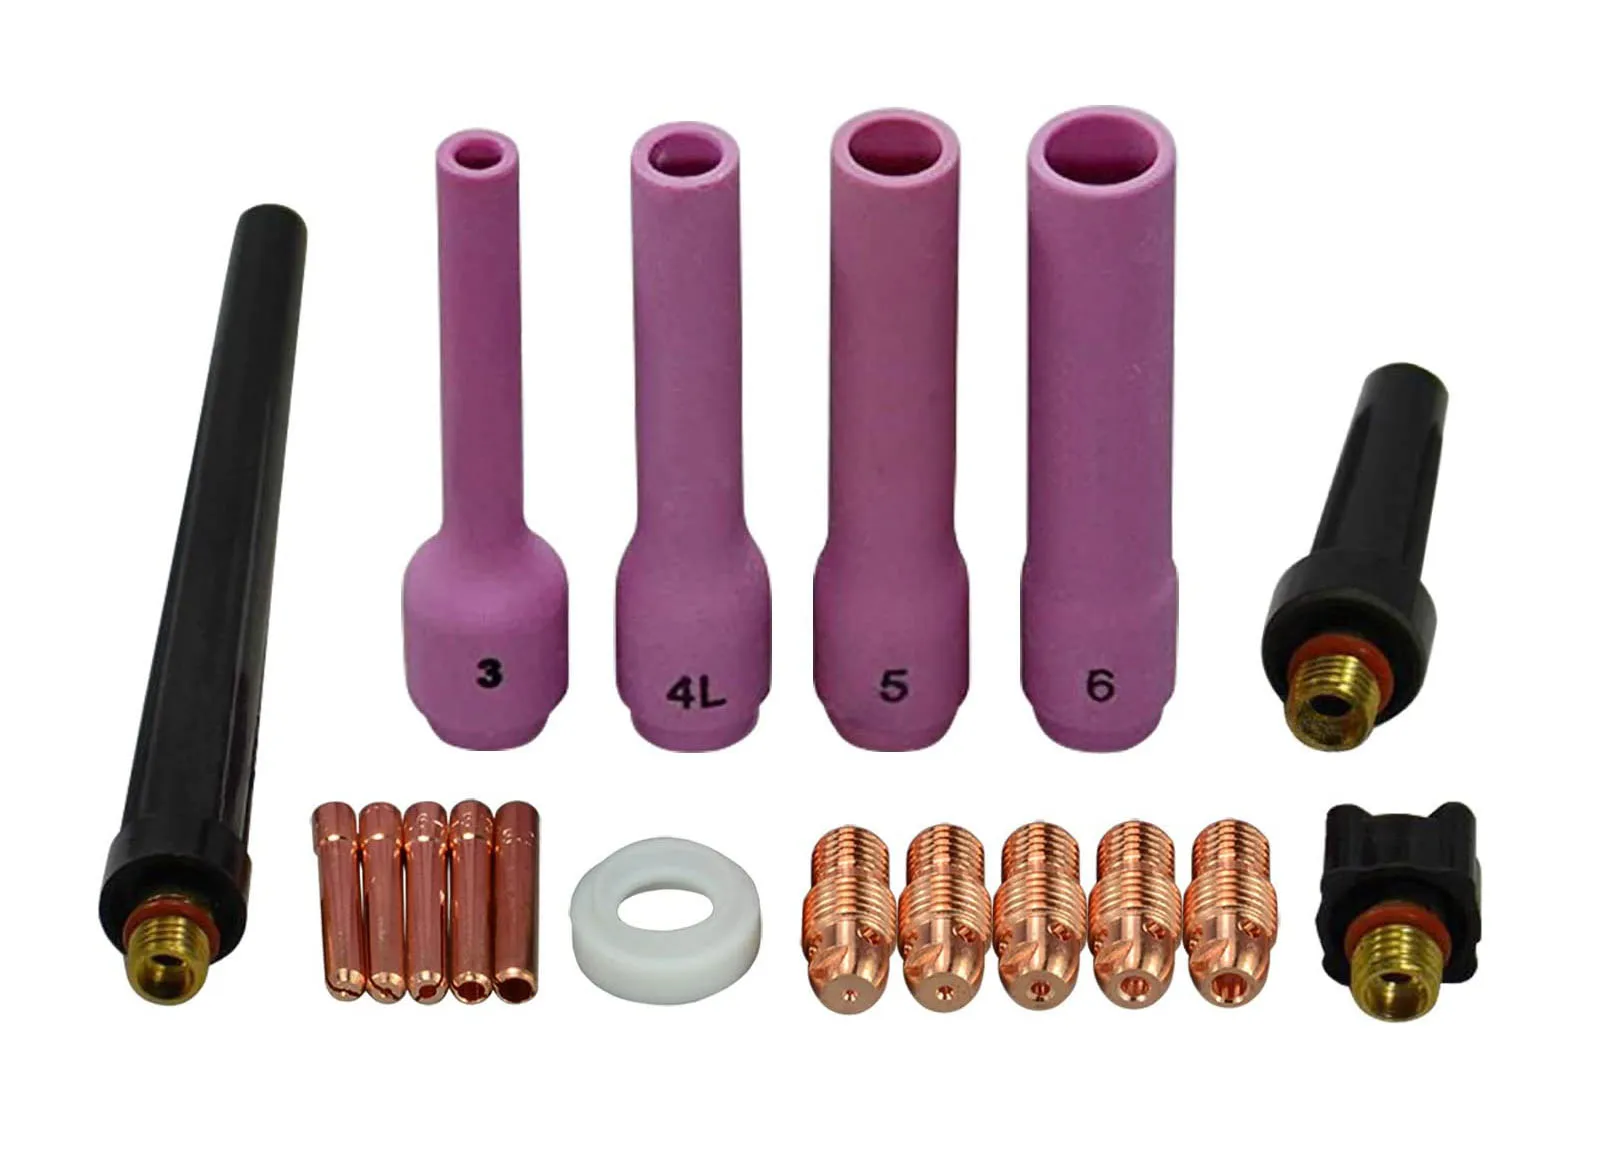 TIG Collet Body Long Alumina Nozzle Back Cap KIT For TIG Welding Torch SR WP9 20 25 Consumable Accessories, 18PK